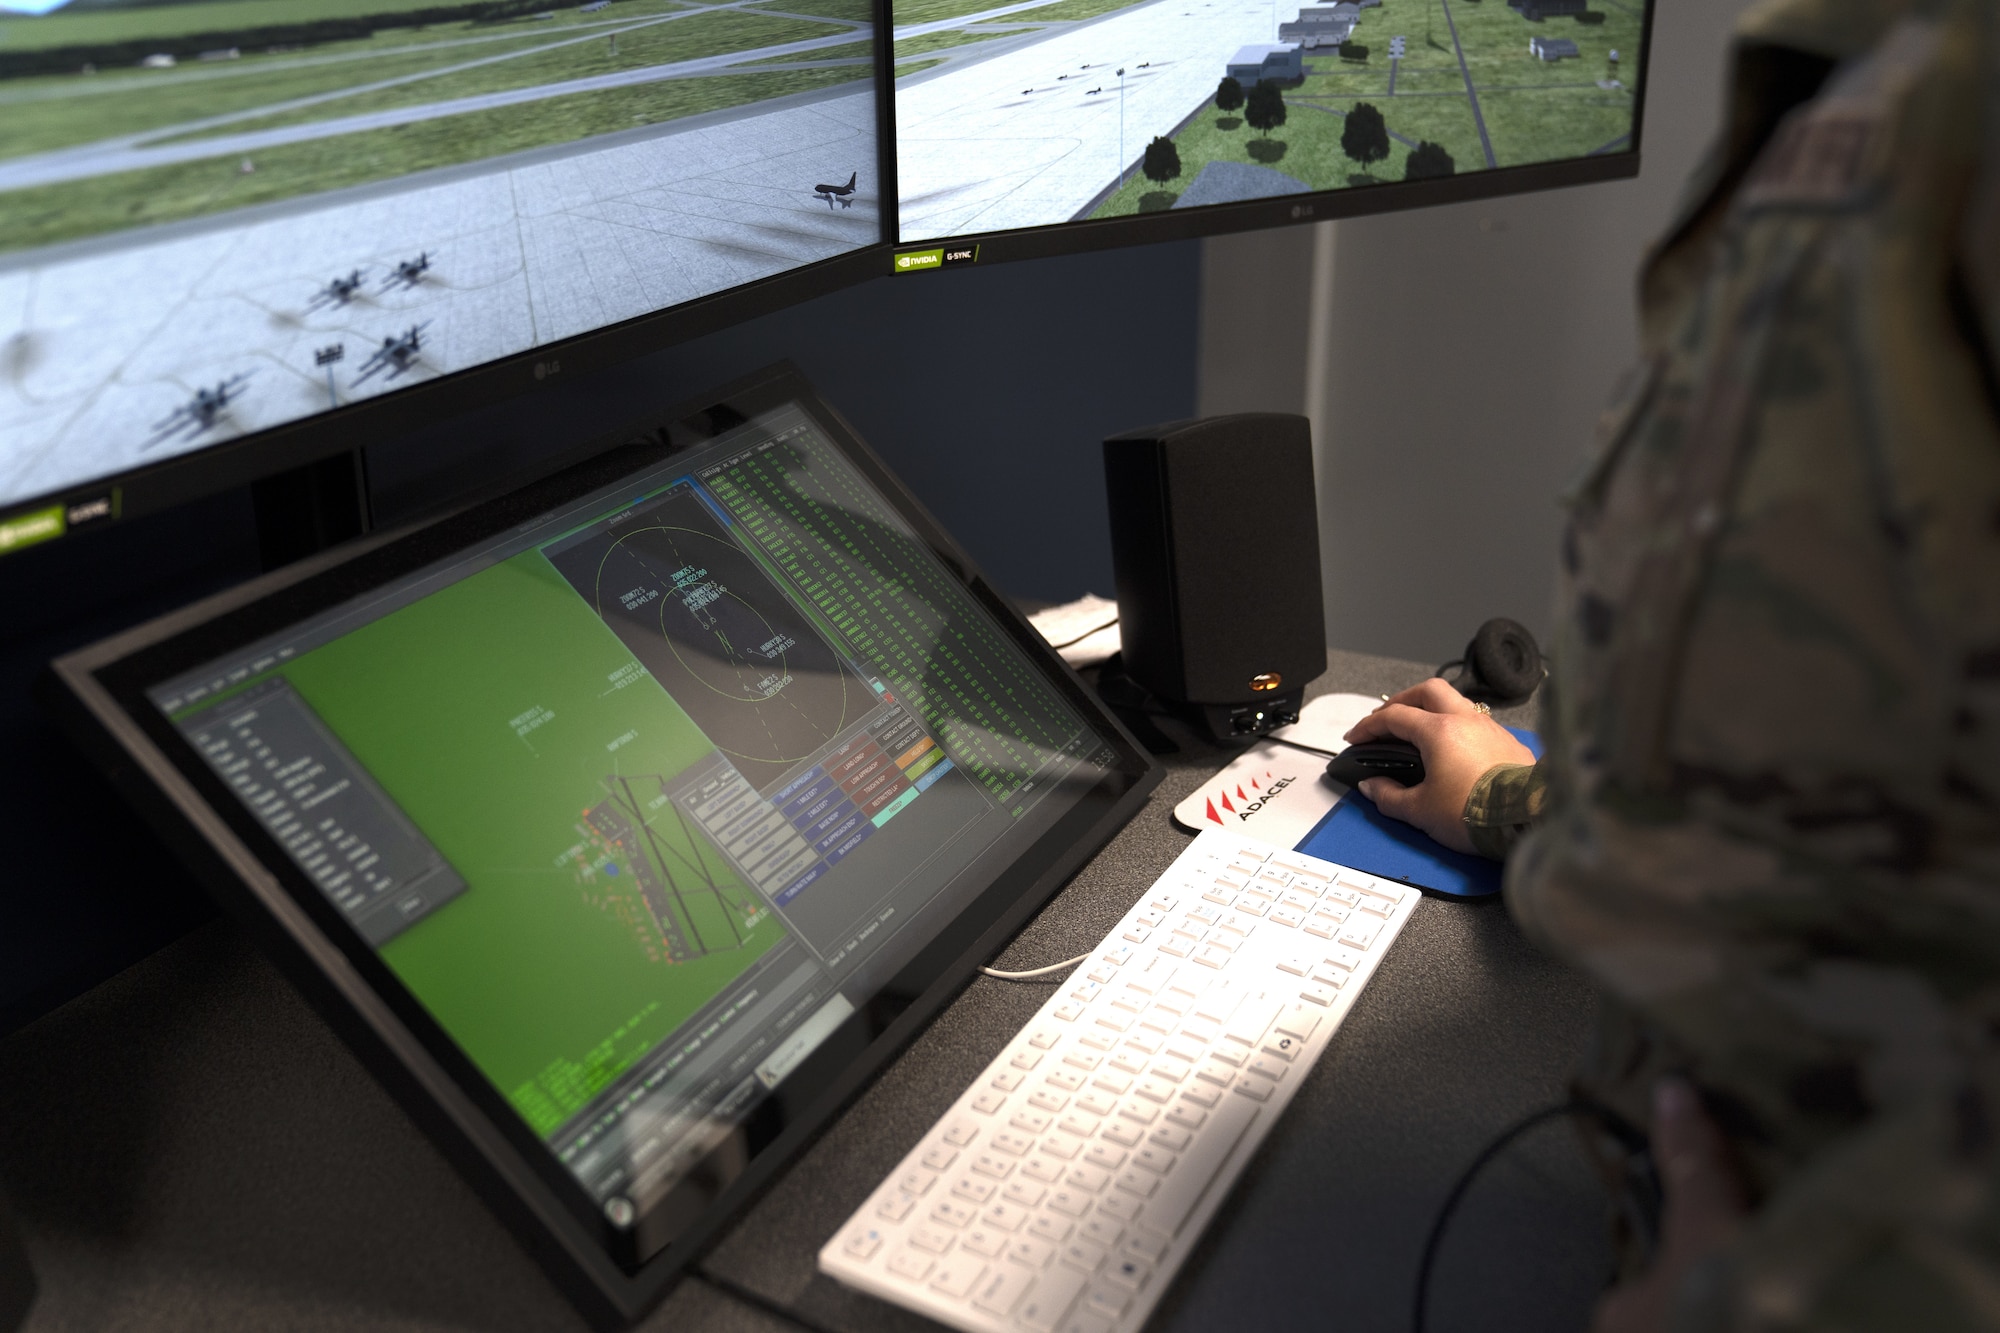 U.S. Air Force Airman 1st Class Shelley McCoy, 334th Training Squadron student, uses a condensed air traffic control tower simulator for training at Cody Hall at Keesler Air Force Base, Mississippi, June 2, 2022. A similar system has been installed in the dorm building to allow students the opportunity to increase tower control contact hours and to provide students additional study time outside the classroom.